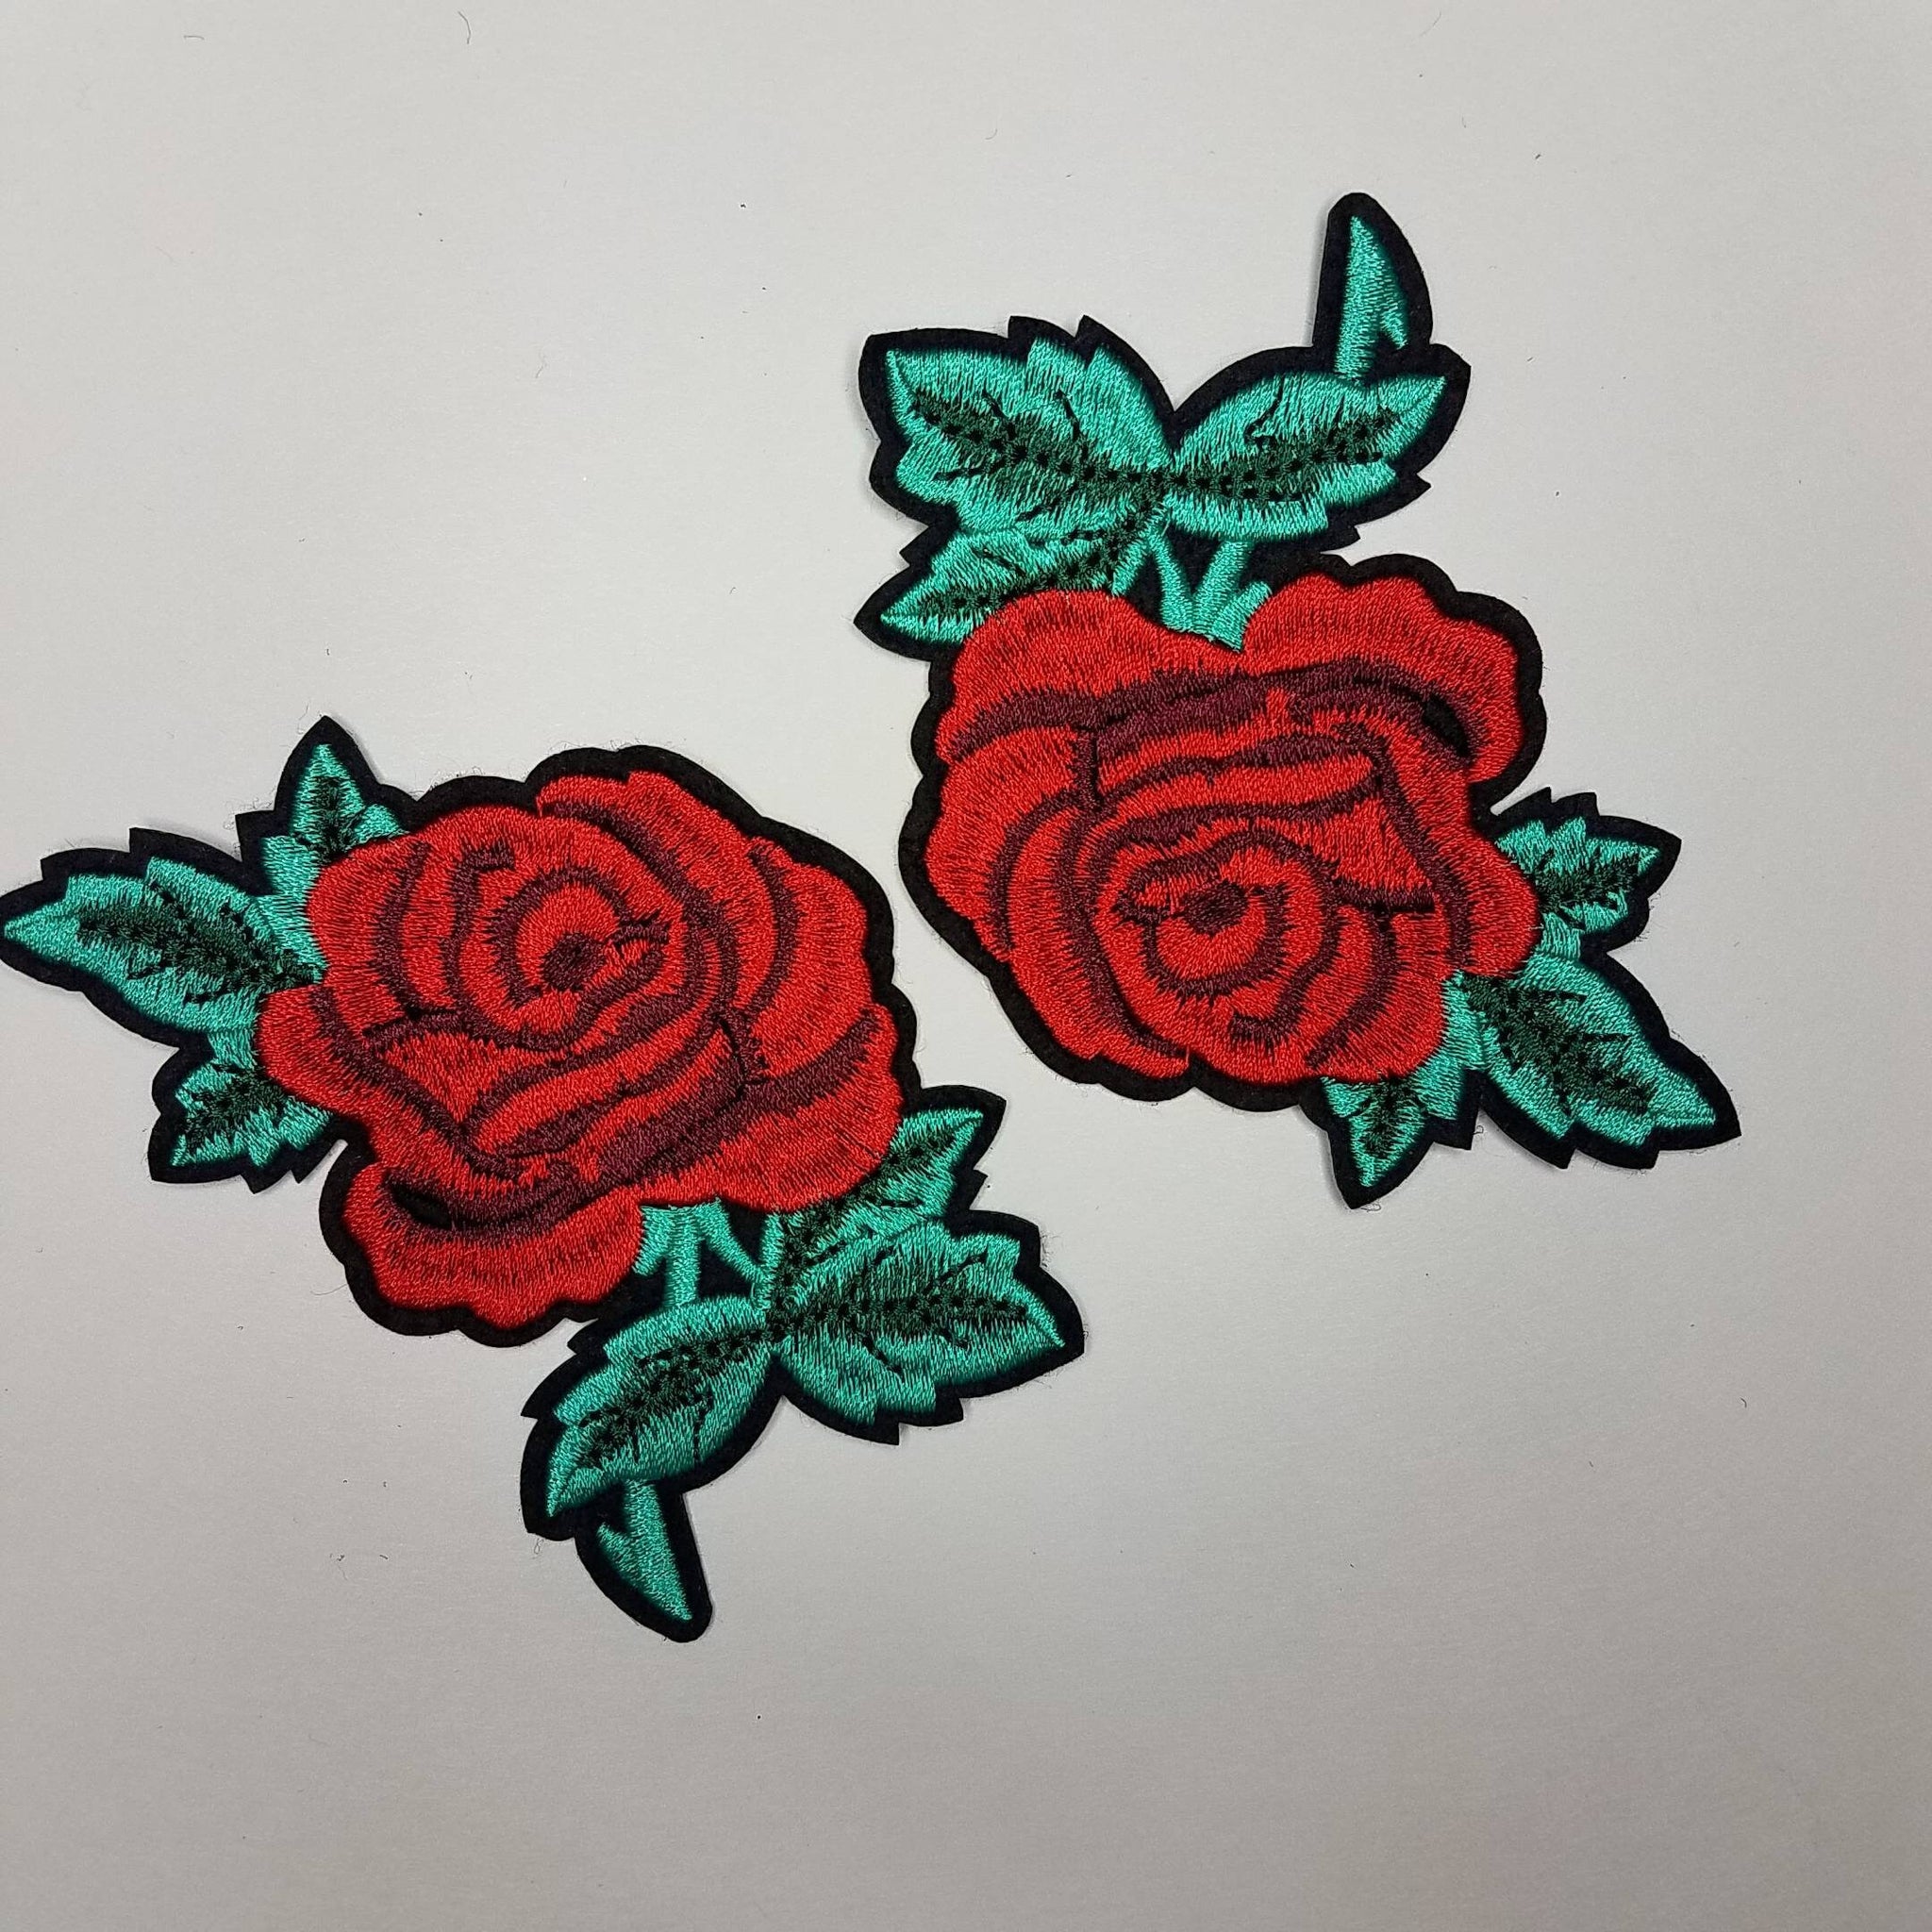 Rosettes, 2 pc Rosebud set, with teal stems  (size 3-inches), matching embroidered iron-on floral patches, Flower Patches, Rose Embroider